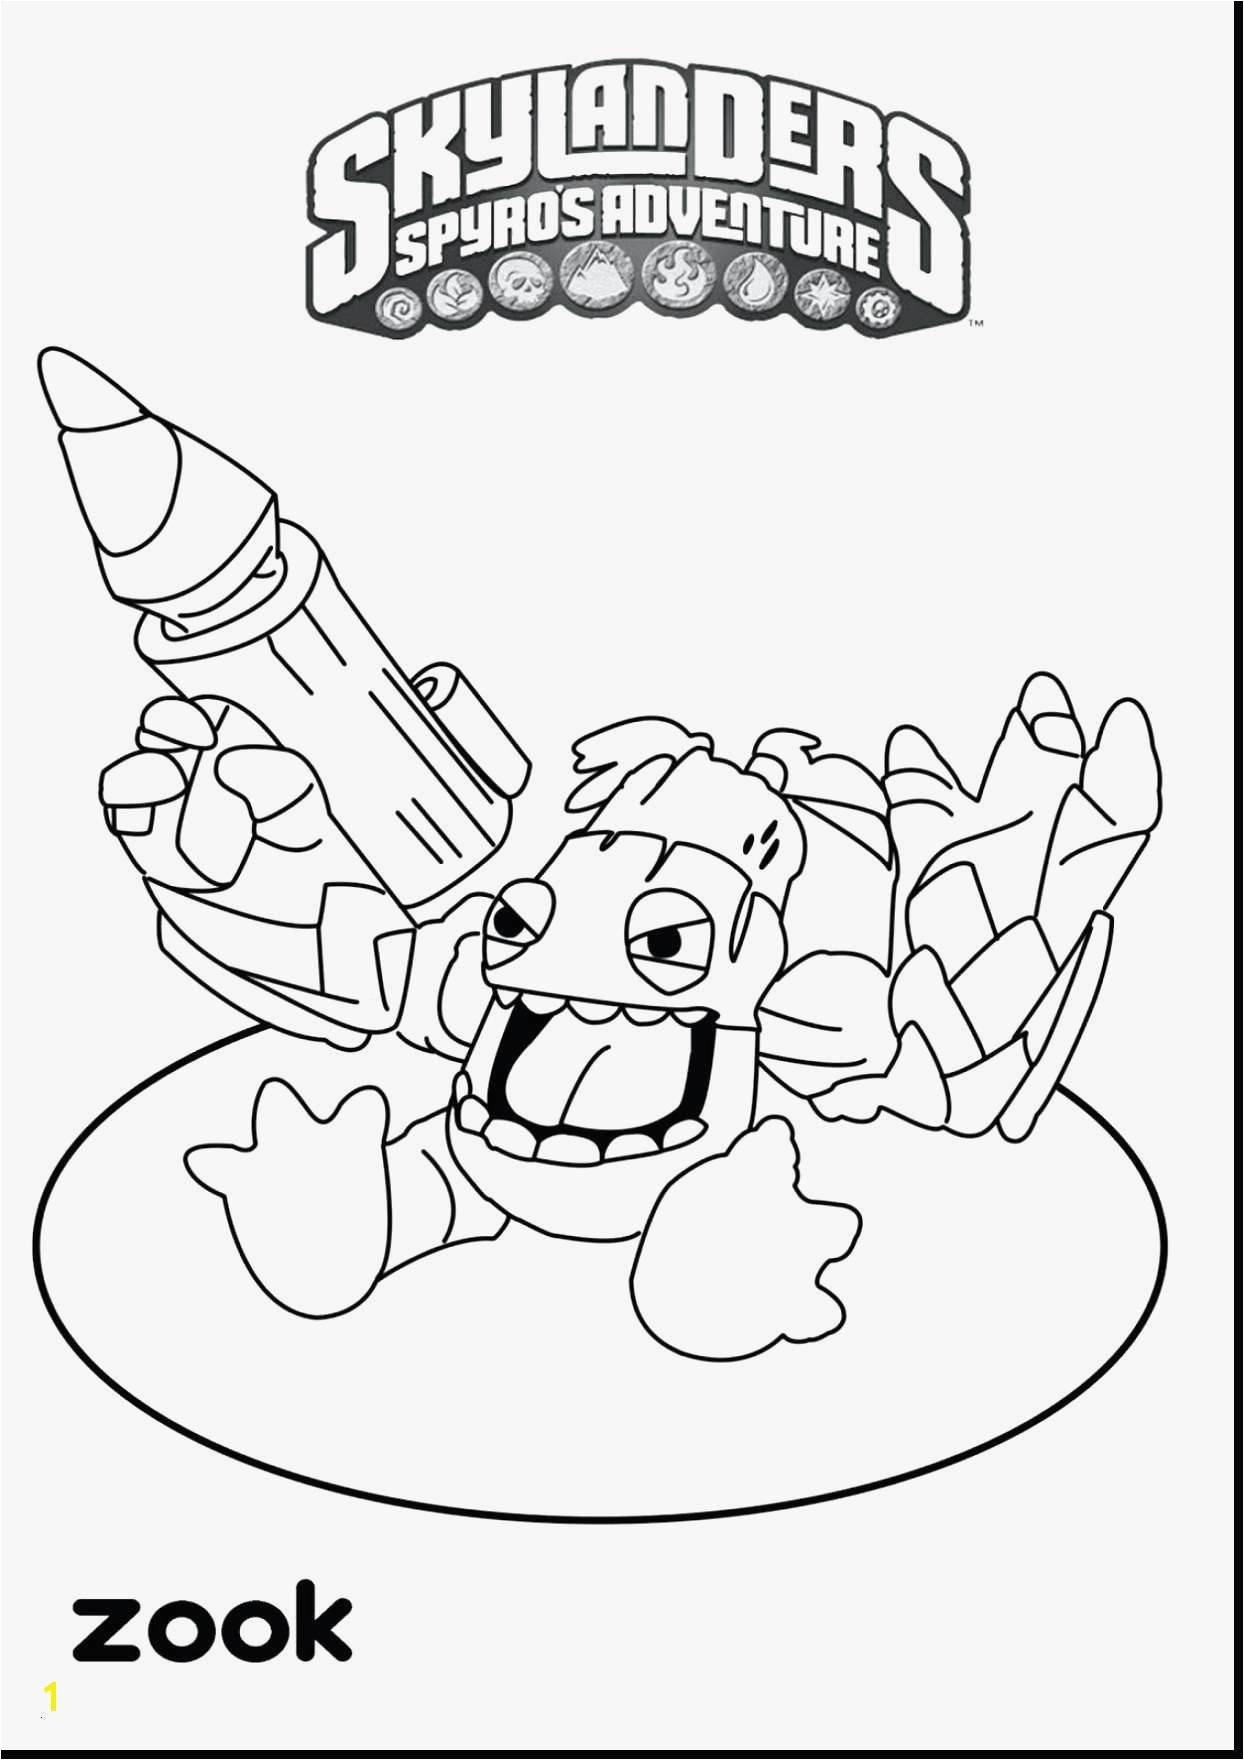 Coloring Pages Kids Cool Coloring Page Inspirational Witch Coloring Pages New Crayola Pages 0d Coloring